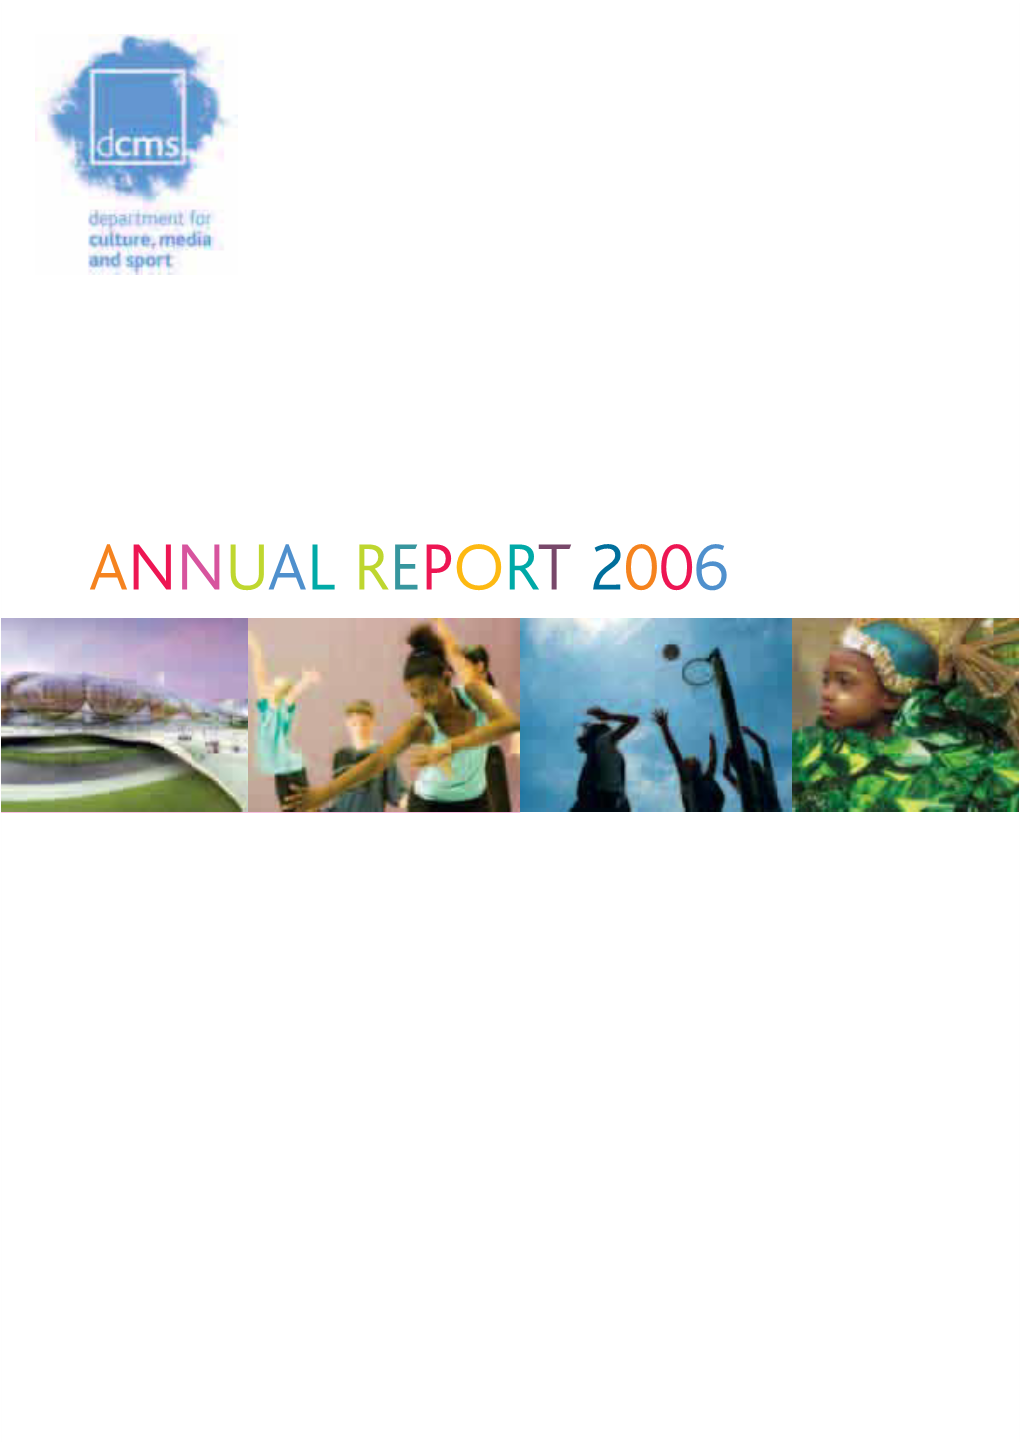 Department for Culture, Media and Sport Annual Report 2006 CM 6828